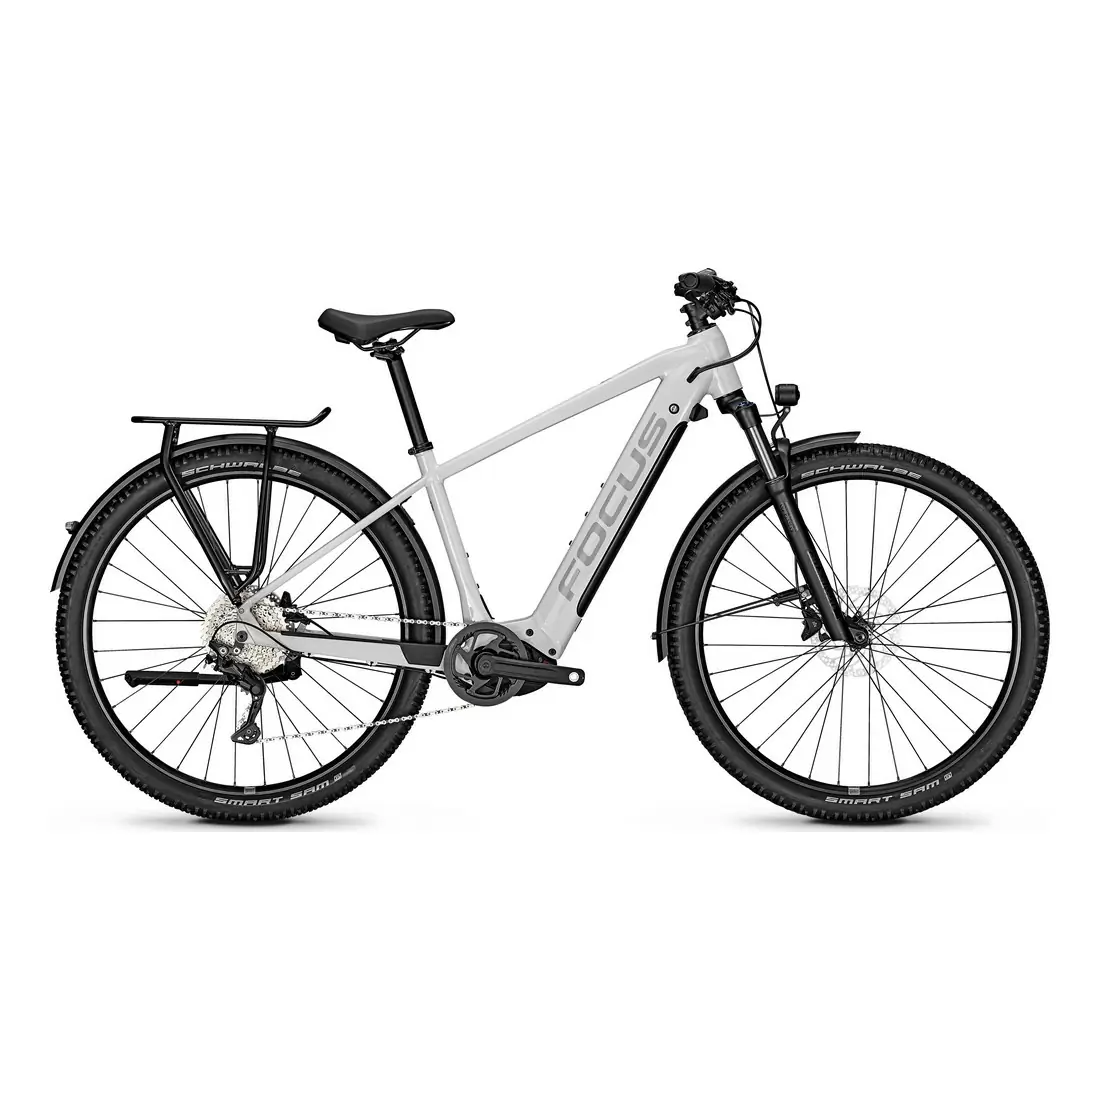 Aventura2 6.7 29'' 100mm 10s 625Wh Bosch CX Grey Size S - image